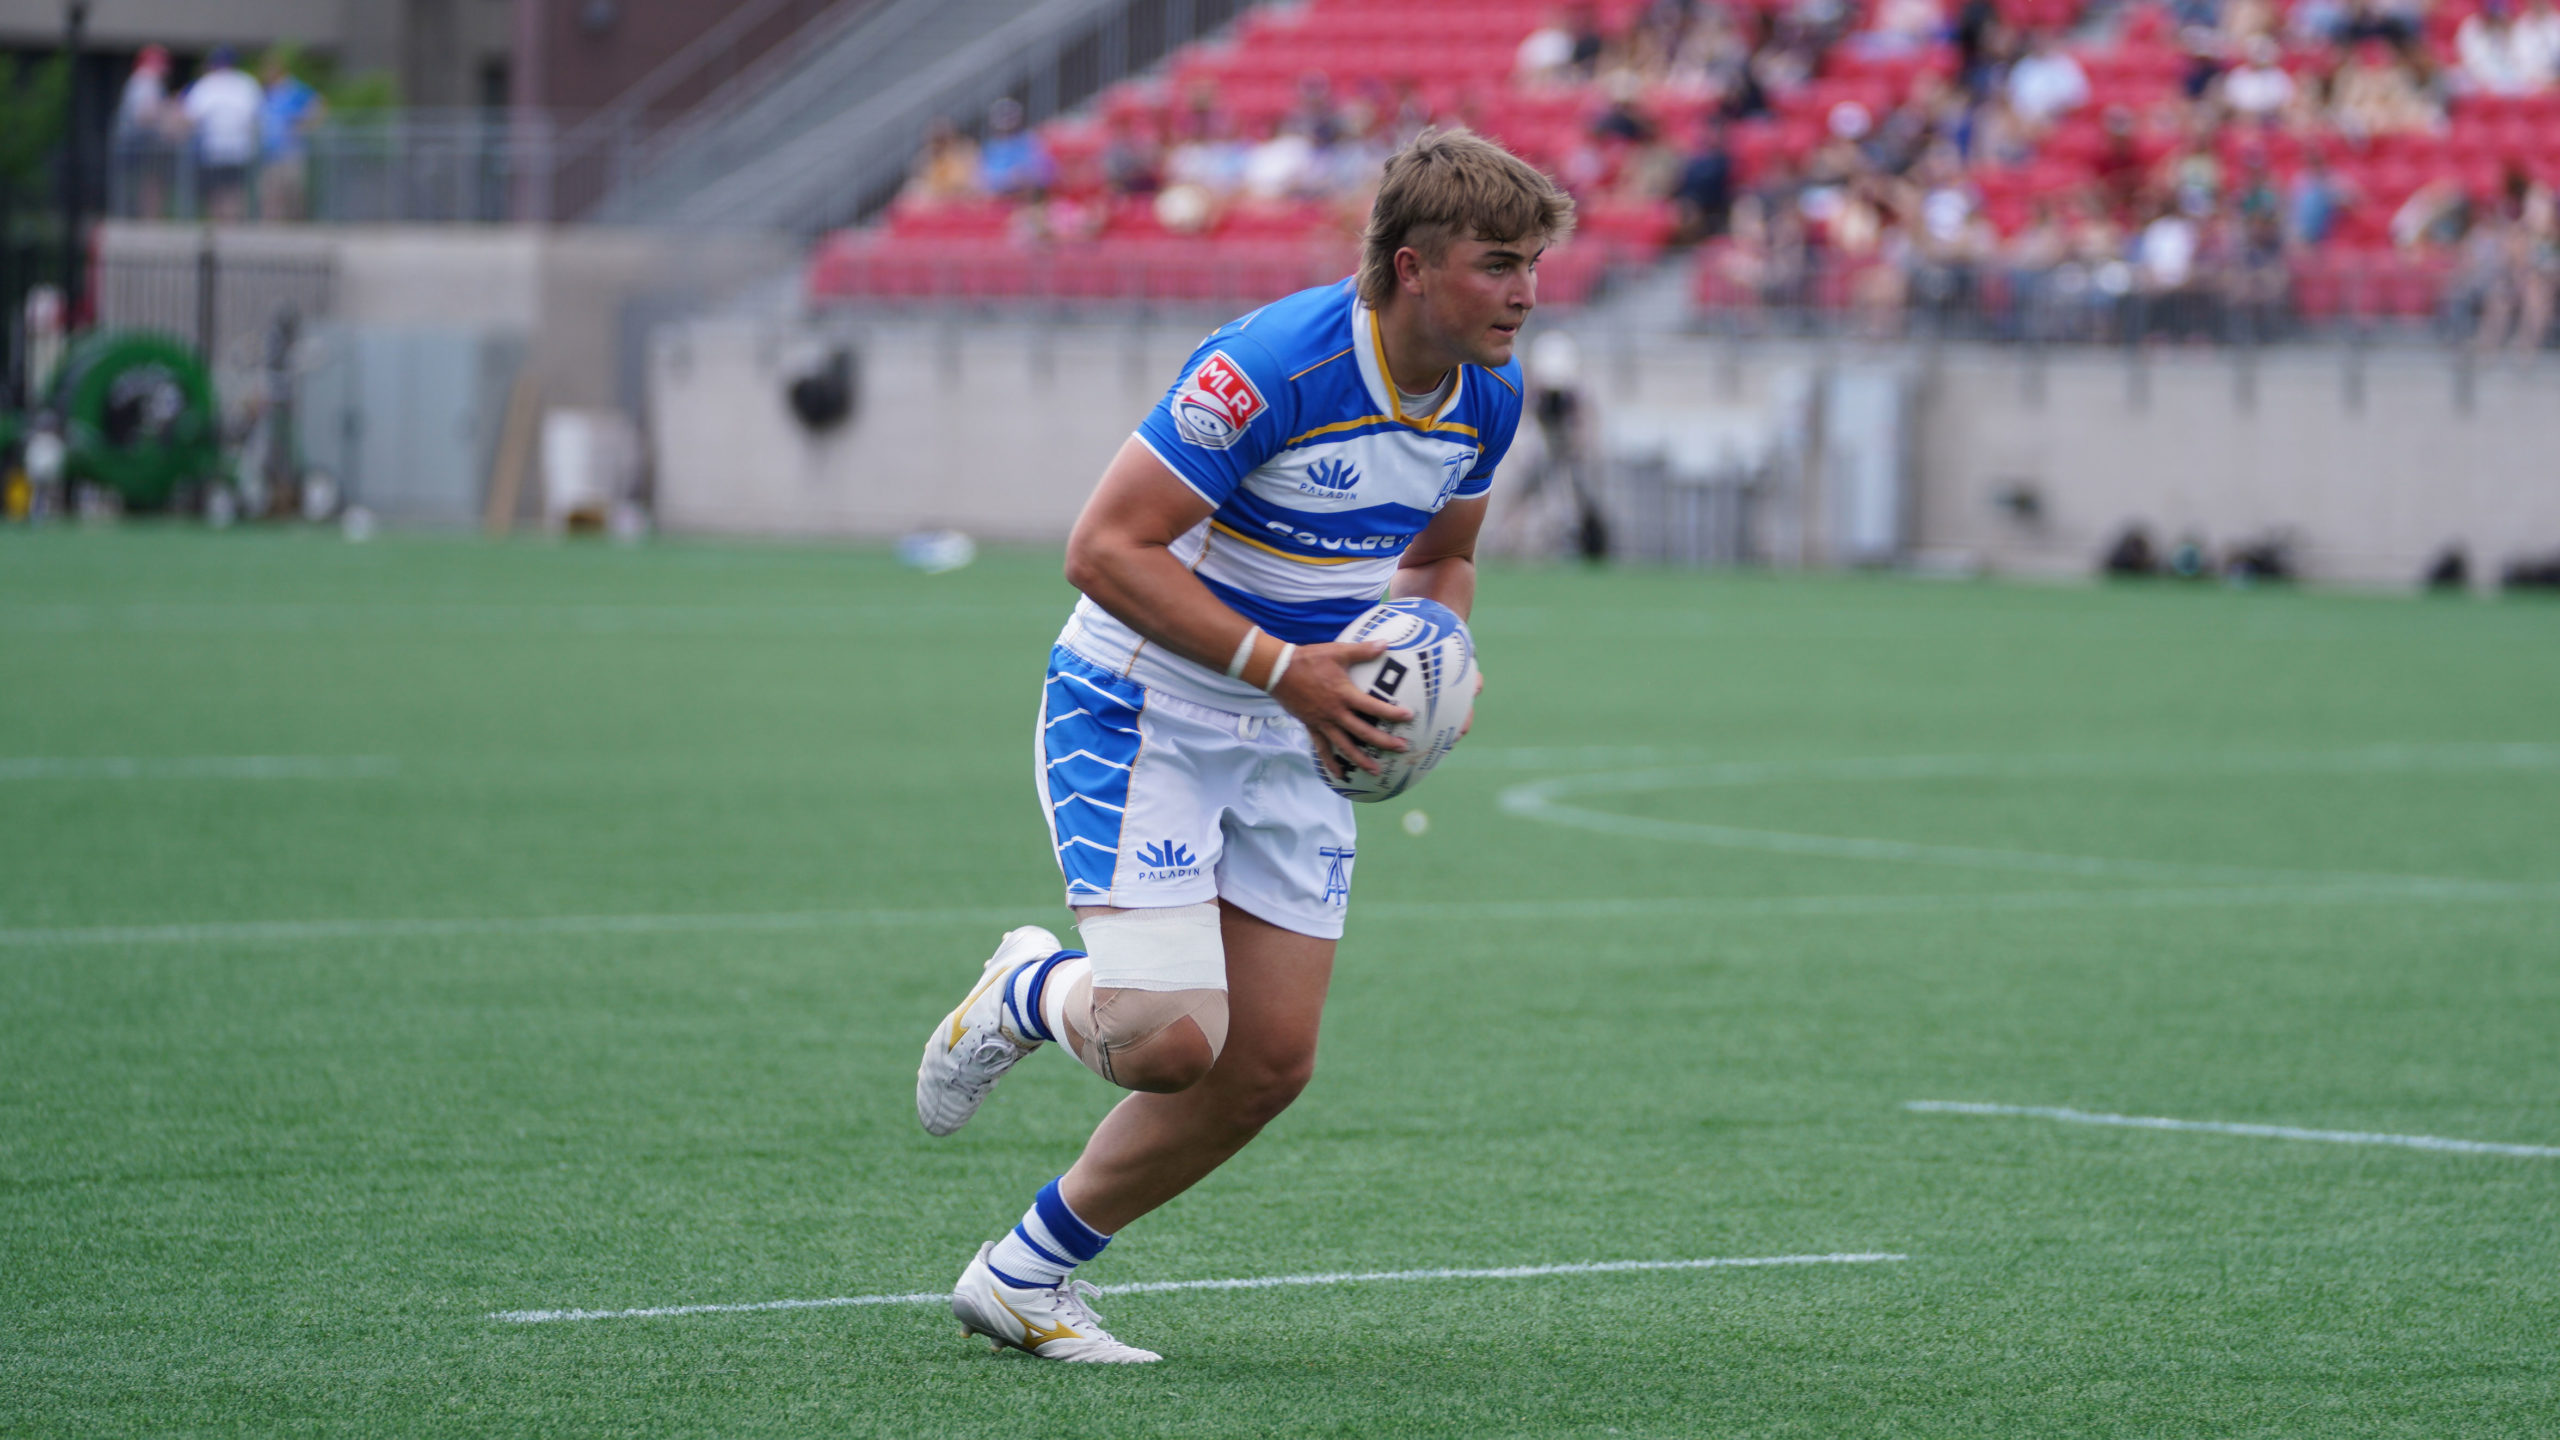 Seven Arrows Selected for Canada’s U20 Side